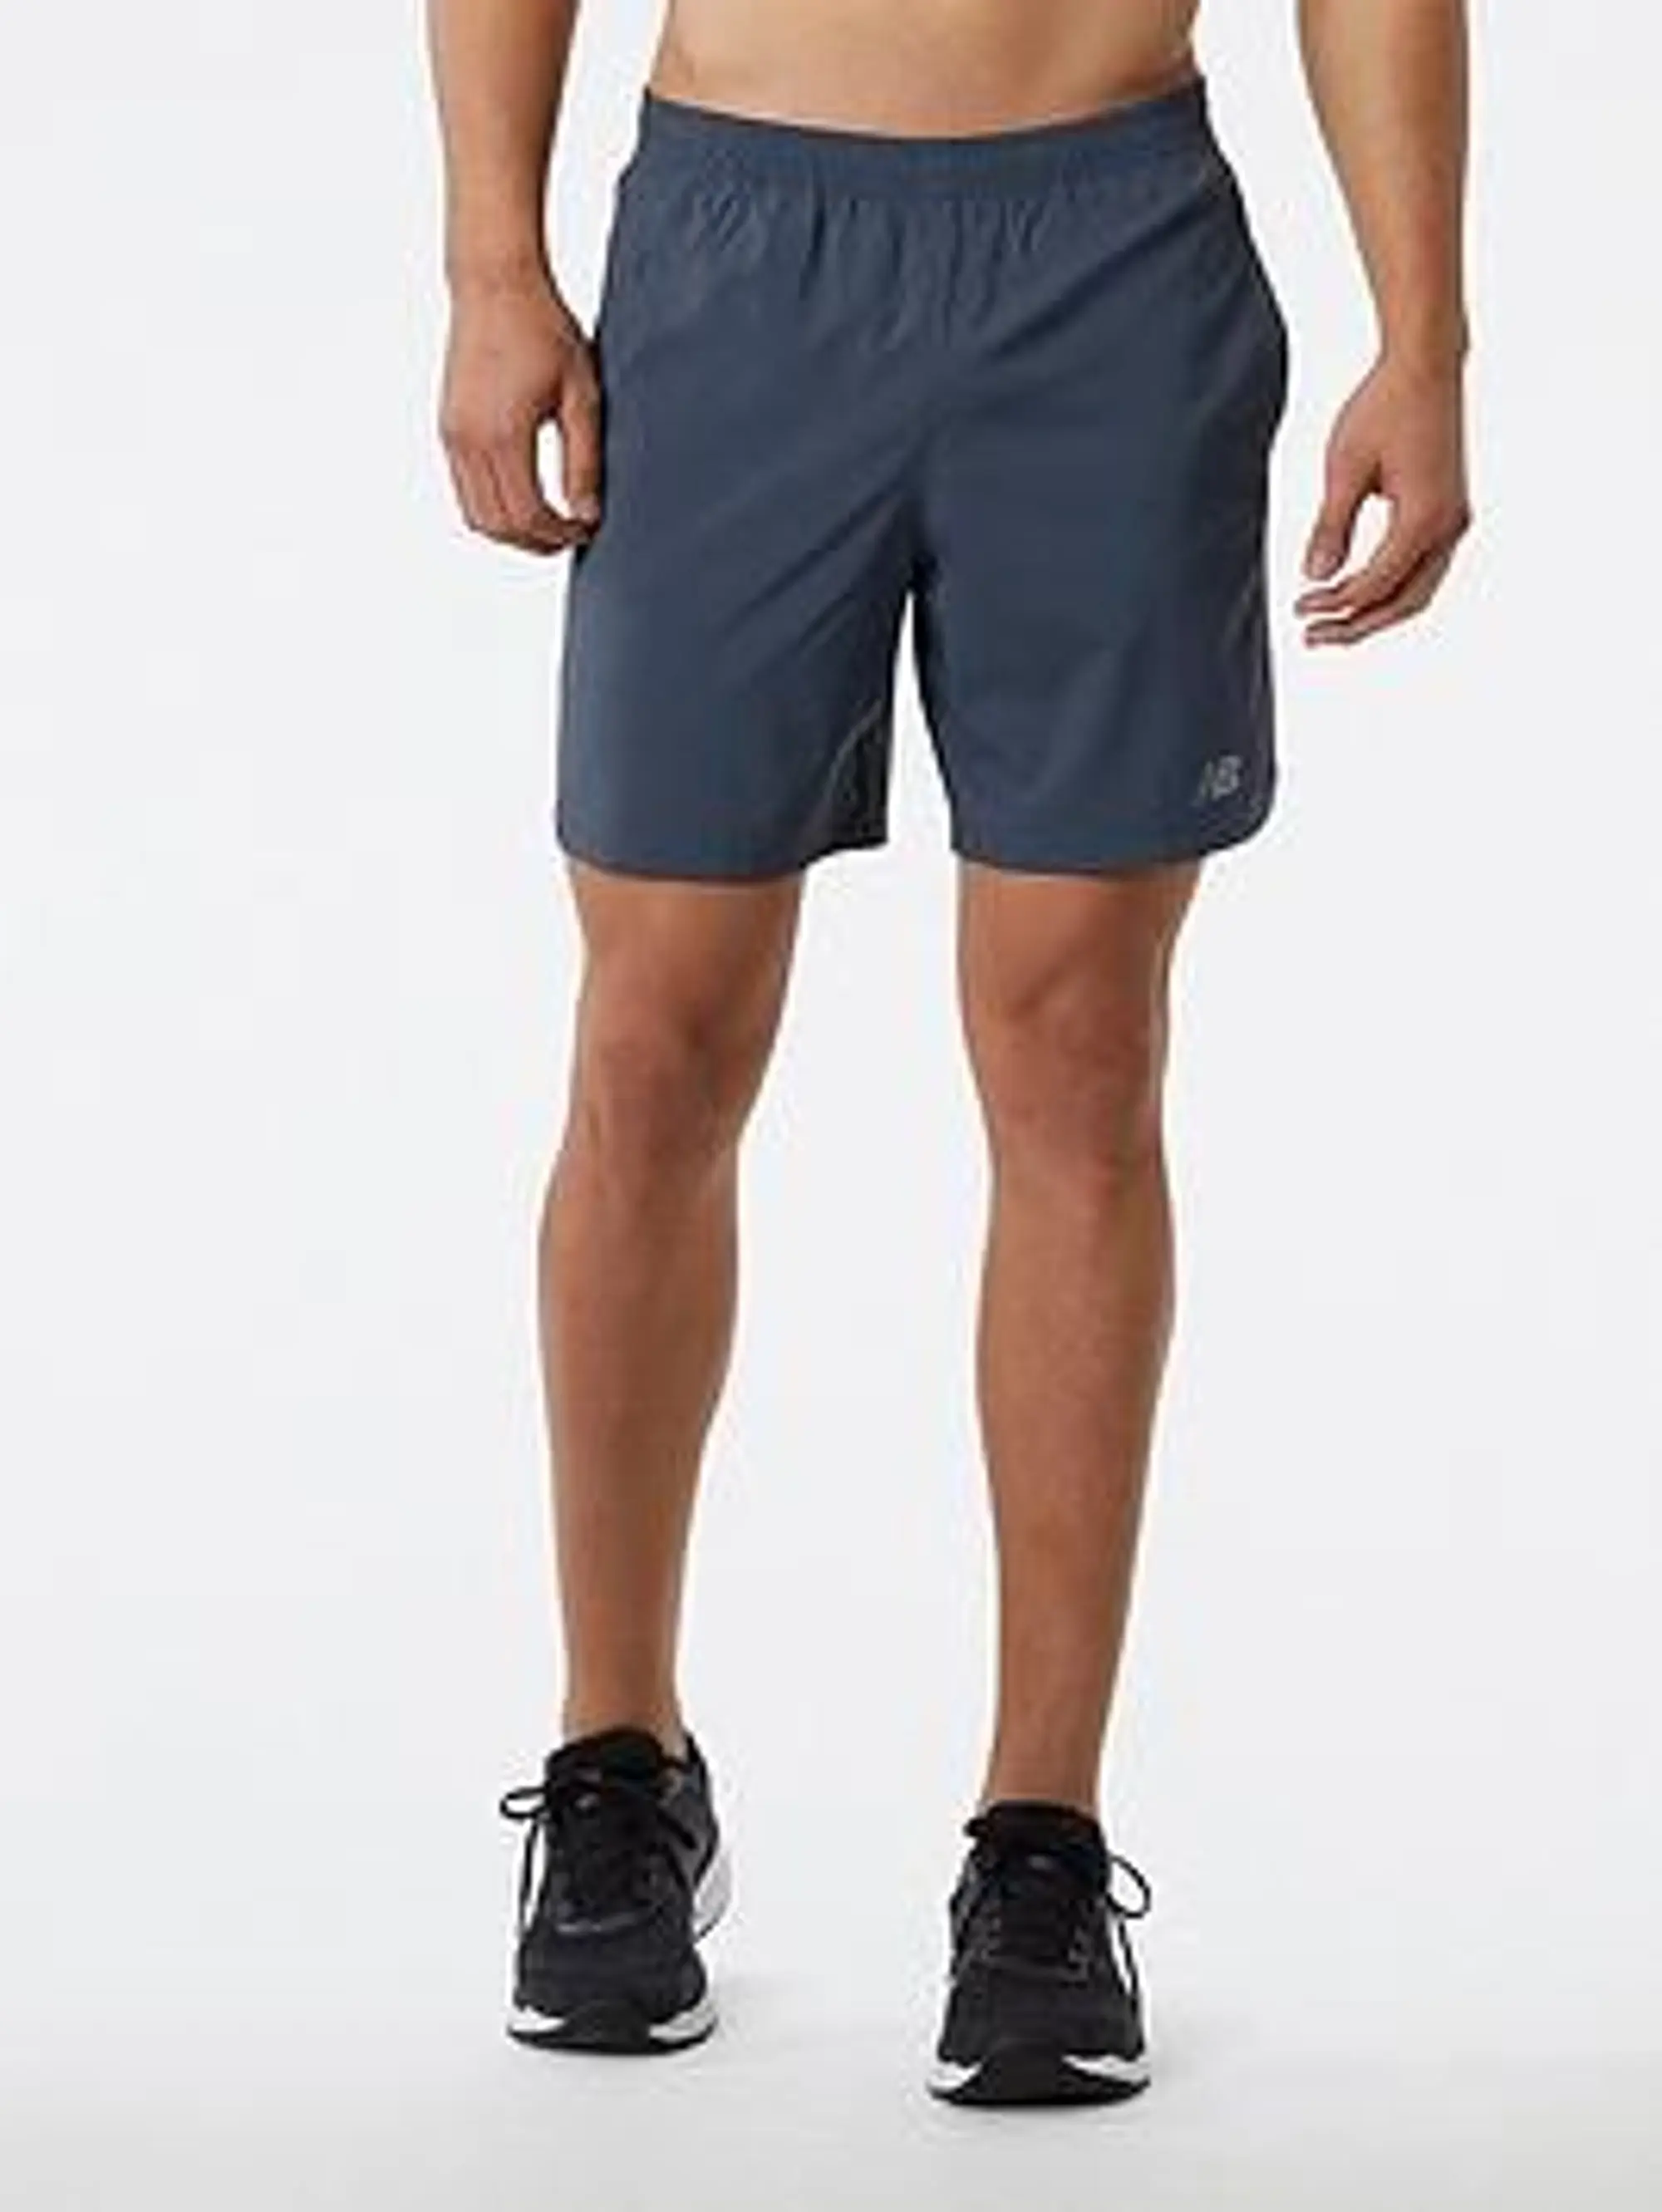 New Balance Men's Accelerate 7 Inch Short in Grey Polywoven